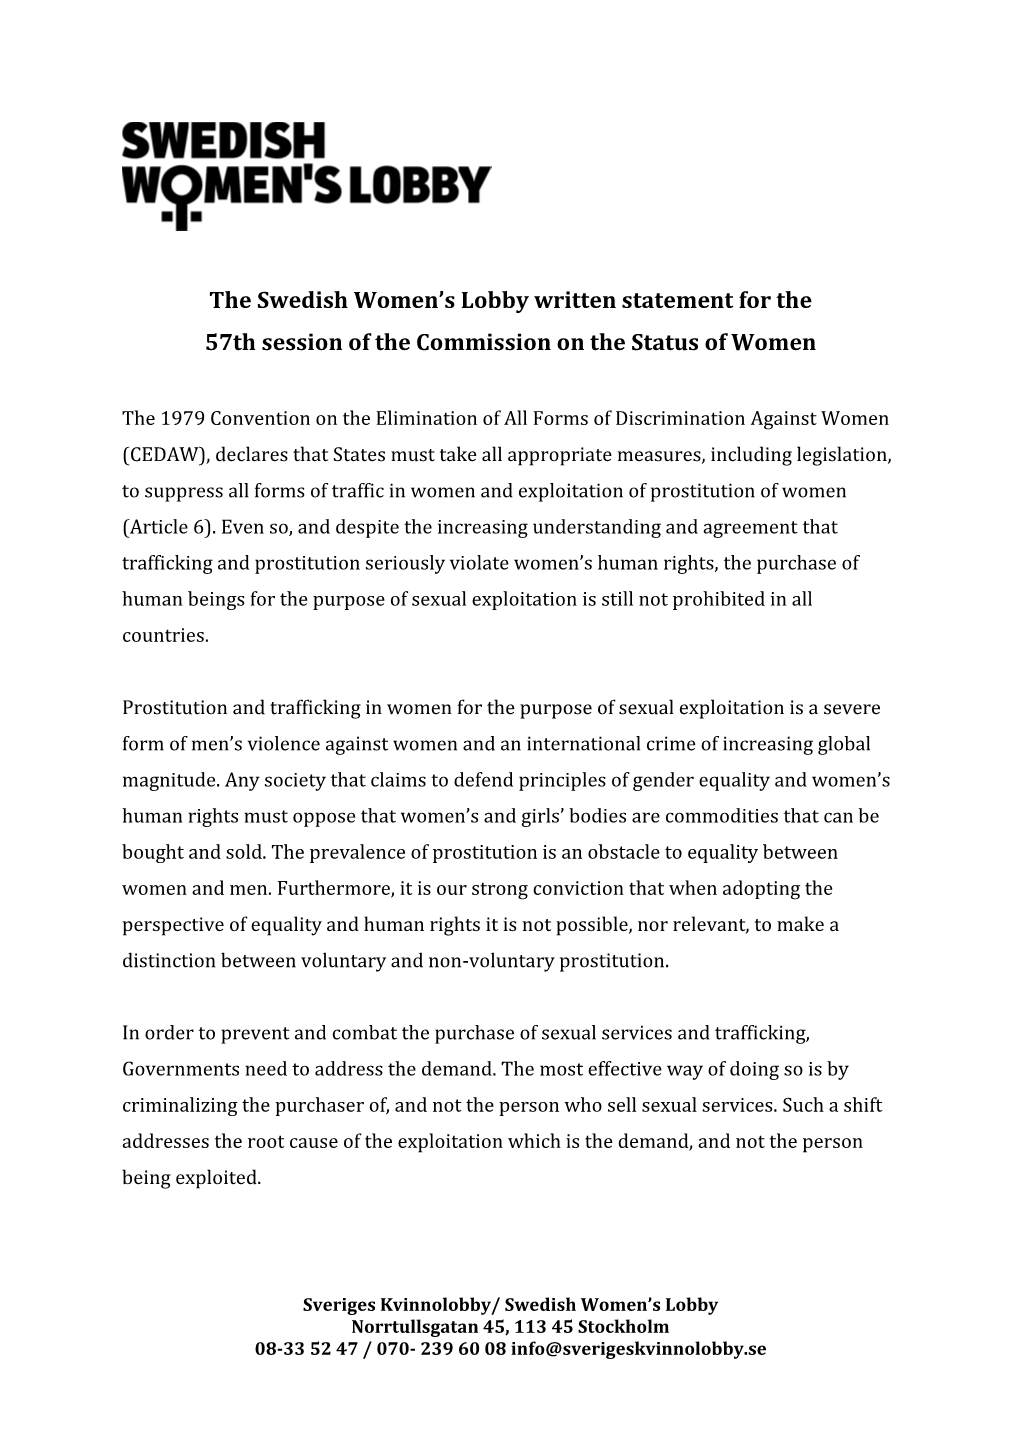 The Swedish Women's Lobby Written Statement for the 57Th Session of The